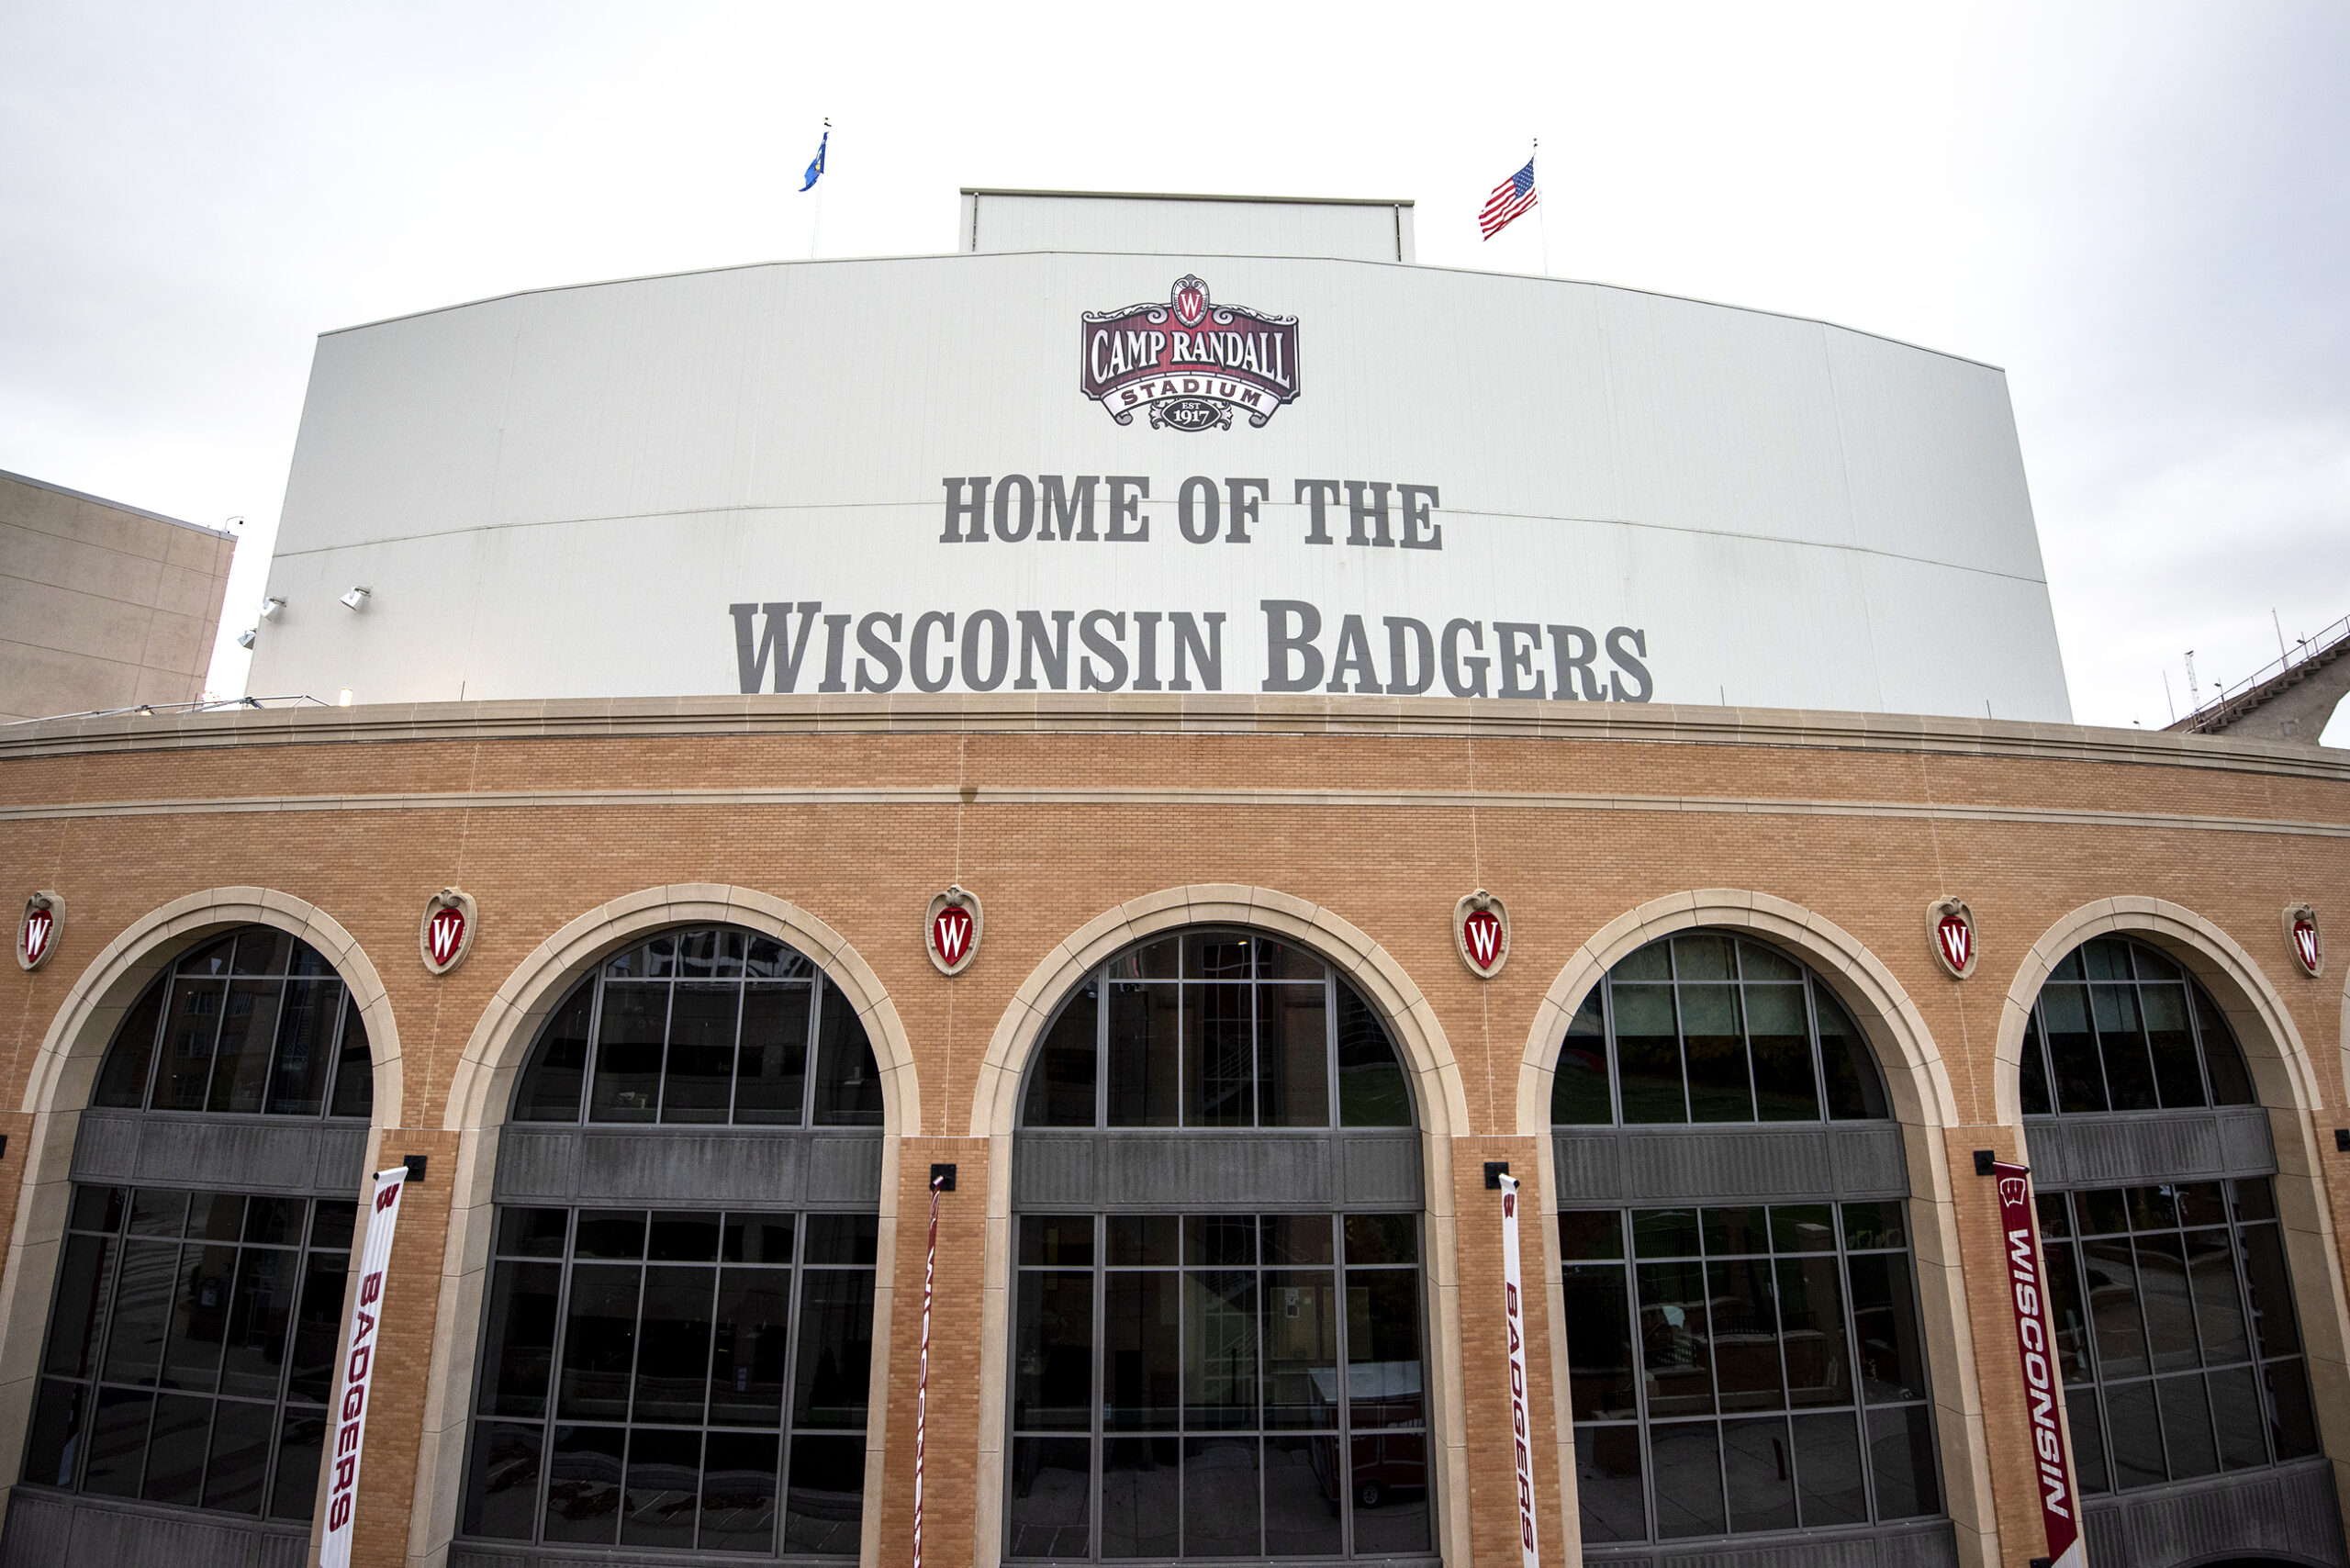 "Home of the Wisconsin Badgers" is written on the side of the stadium